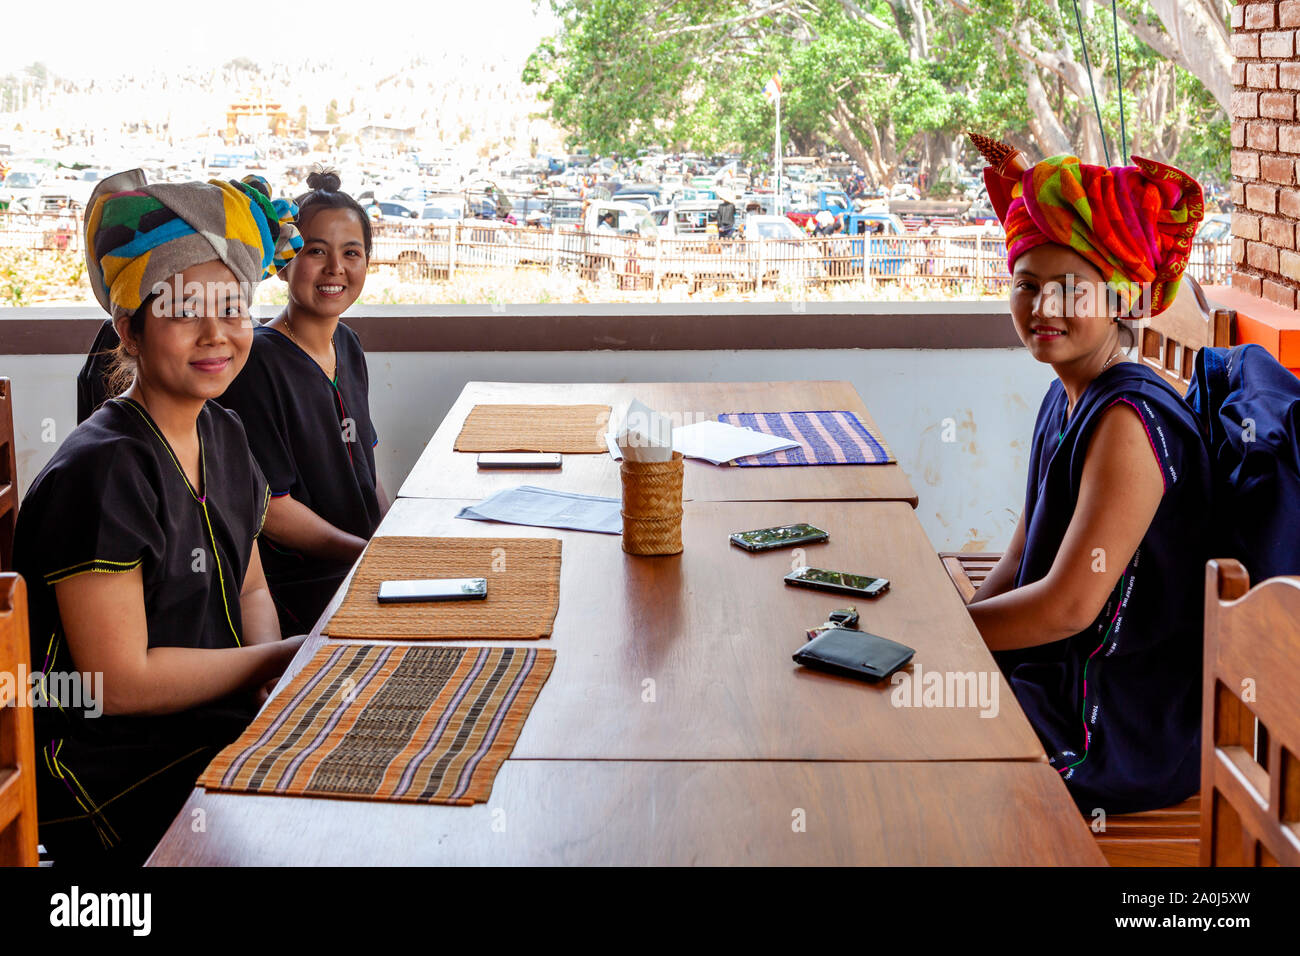 Young Women From The Pa’O Ethnic Group Sitting Inside A Restaurant At The Kakku Pagoda Festival, Taunggyi, Shan State, Myanmar. Stock Photo